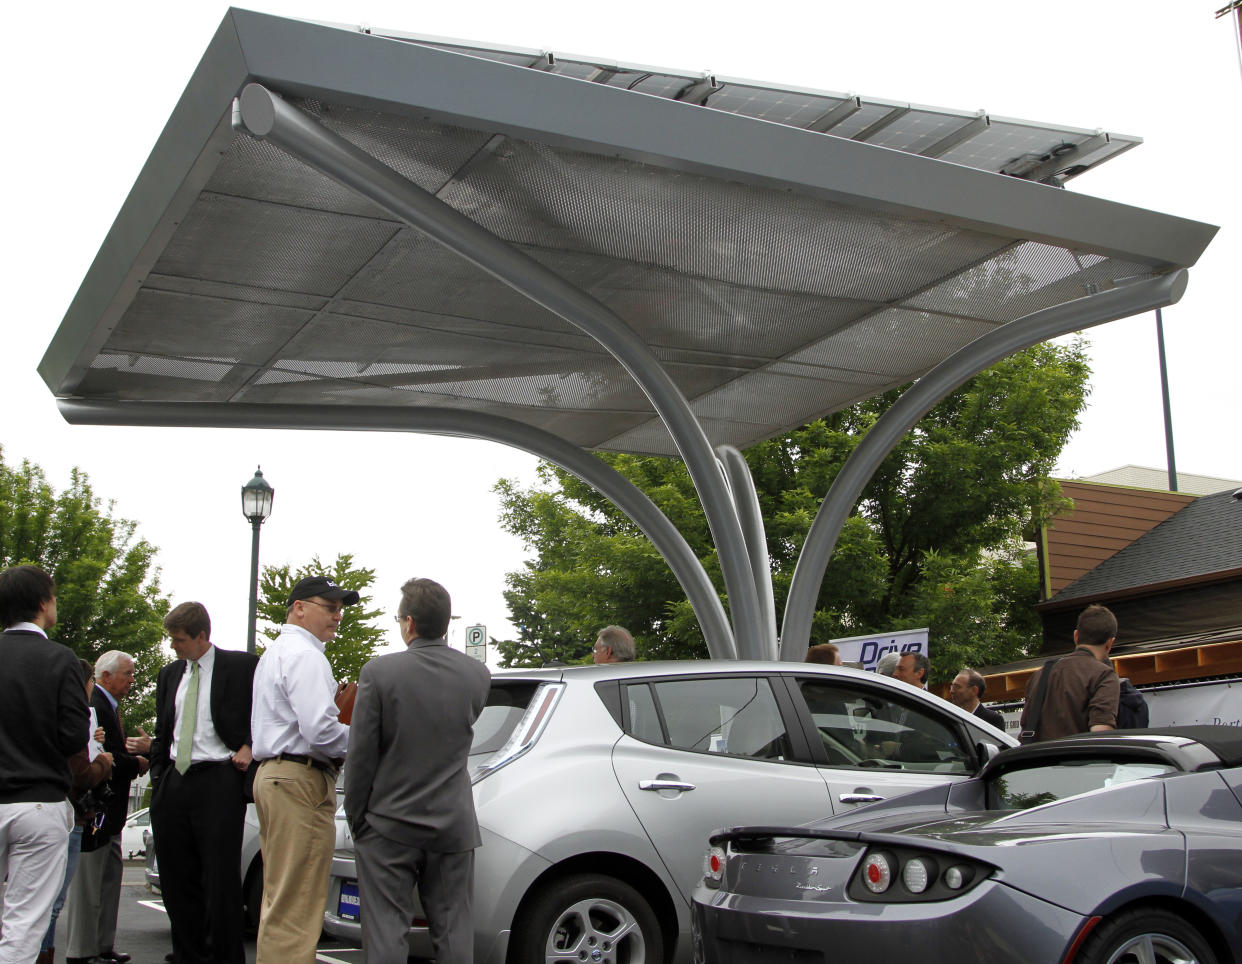 A solar canopy stands over Tesla, right,  and Nissan Leaf electric cars at the unveiling of a solar-powered electric car charging station in Portland, Ore., Wednesday, June, 8, 2011.  The grid-tied solar canopy, one of only two of its' kind in Portland, has two charging stations with the capacity to fully charge six electric vehicles a day.(AP Photo/Don Ryan)